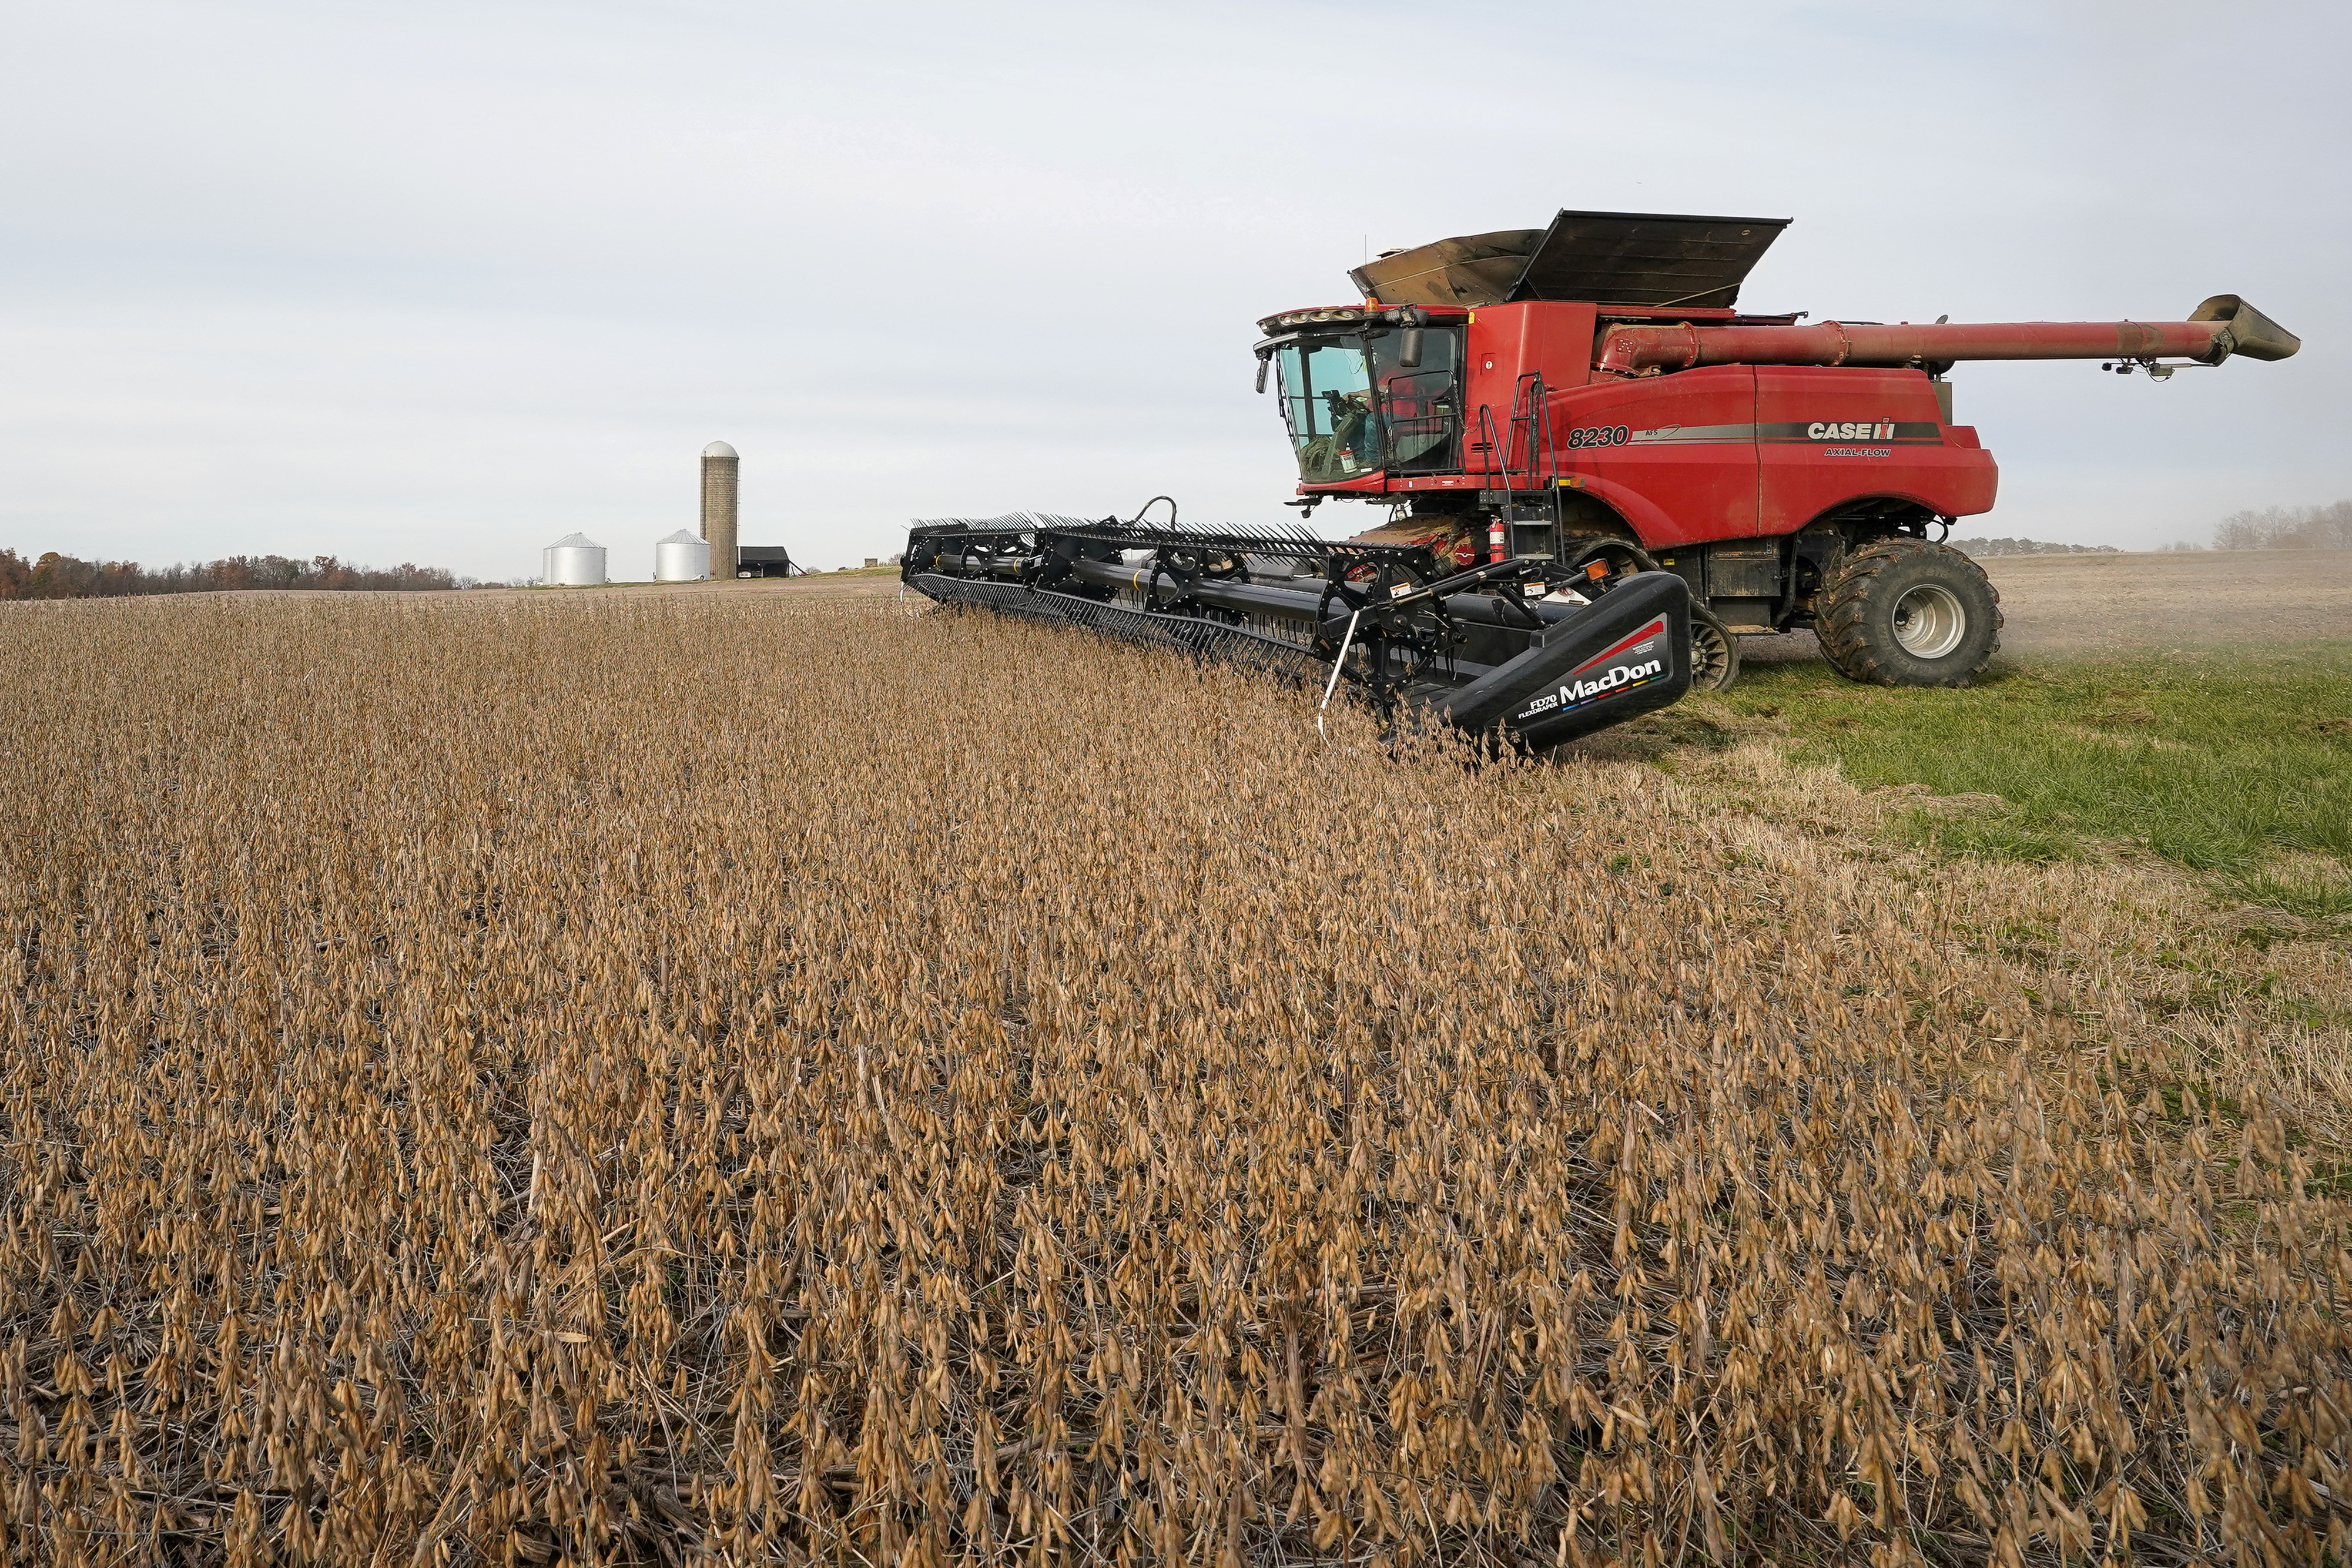 Soybeans are harvested from a field on Hodgen Farm in Roachdale